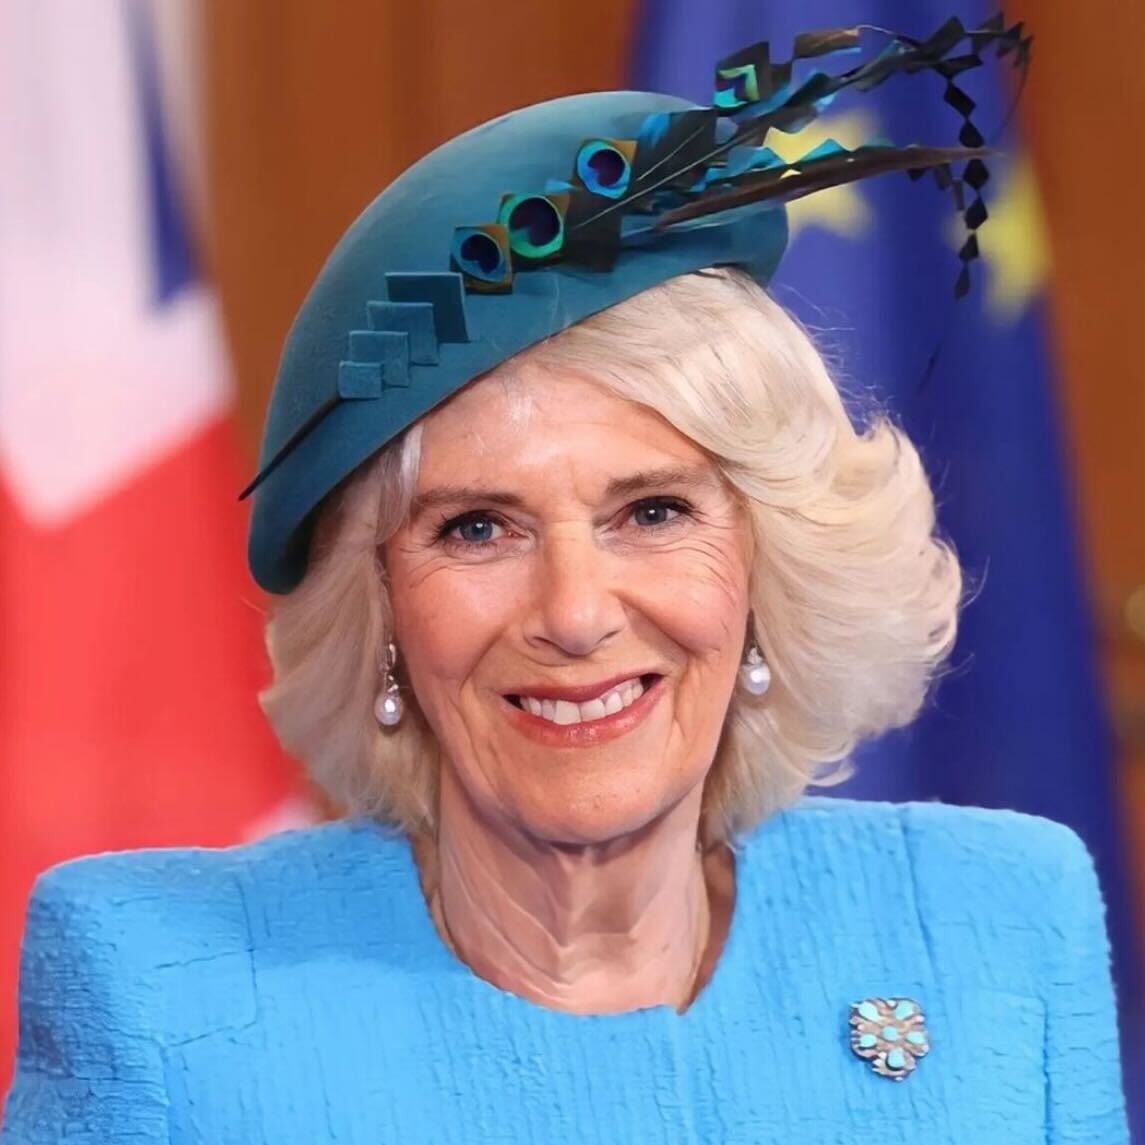 Queen Camilla's favourite piece of jewellery is a 'lucky' symbol